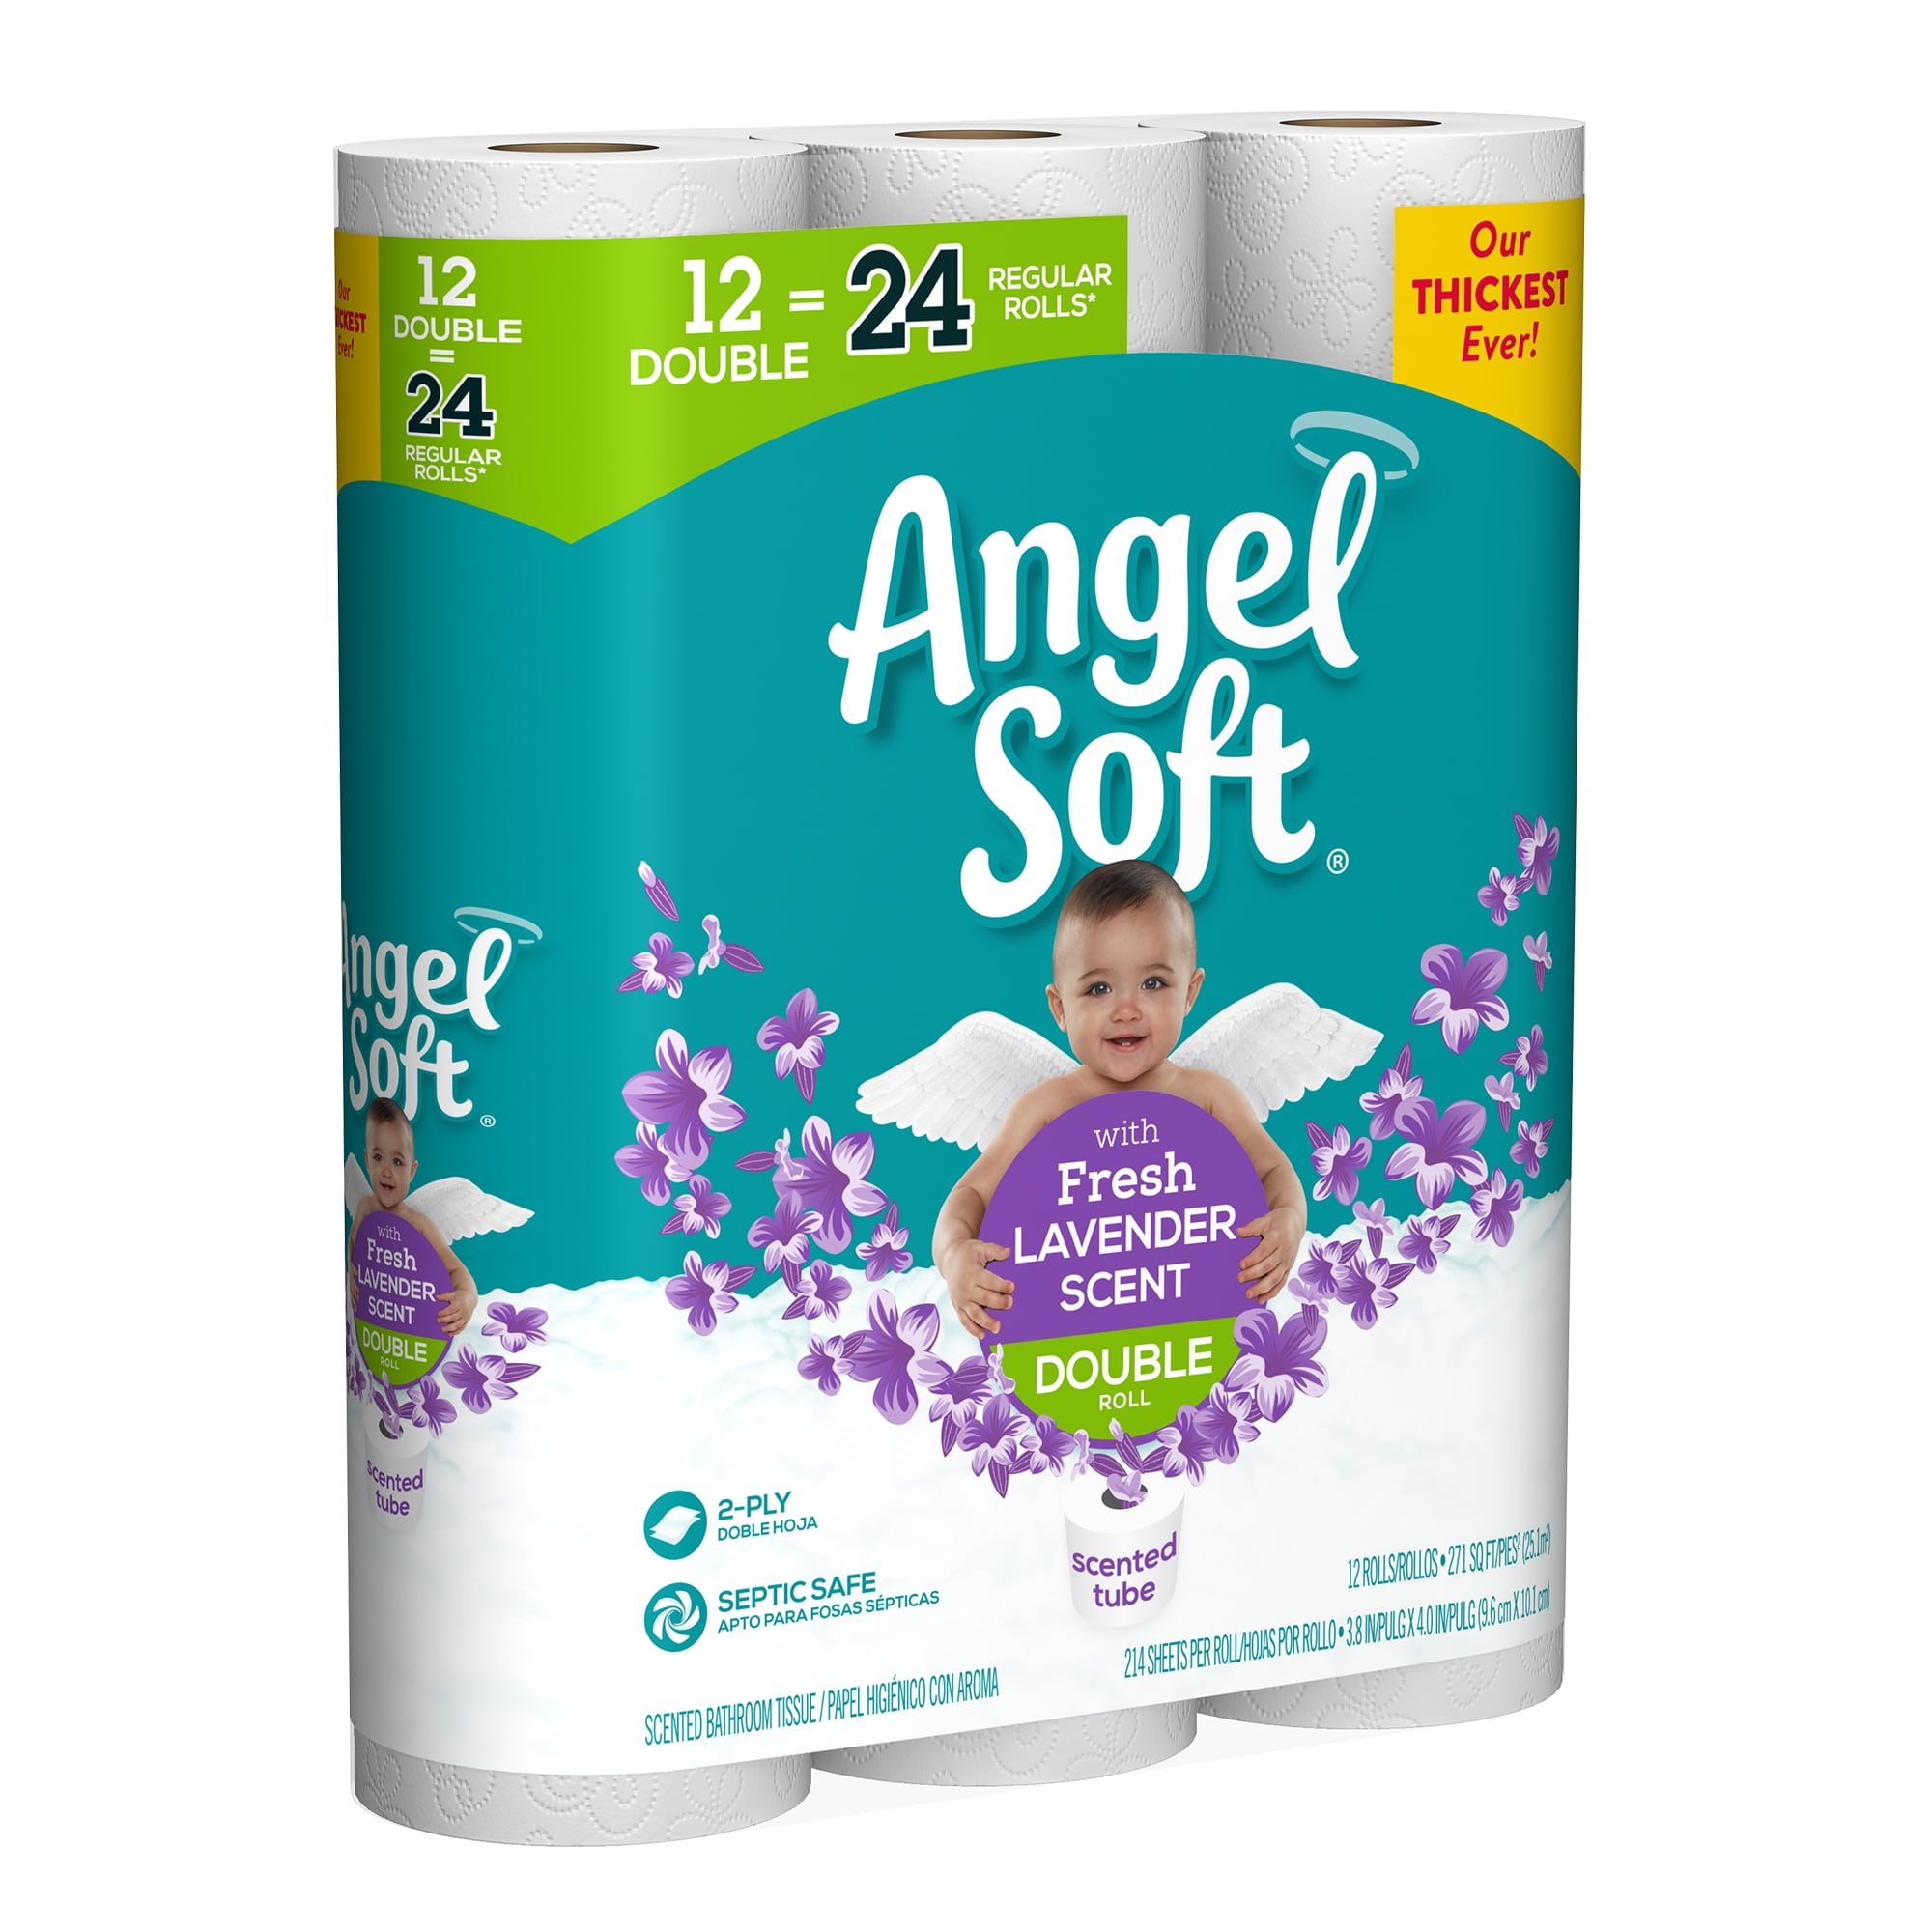 Angel Soft Toilet Paper with Fresh Lavender Scent, 12 Double Rolls - 1